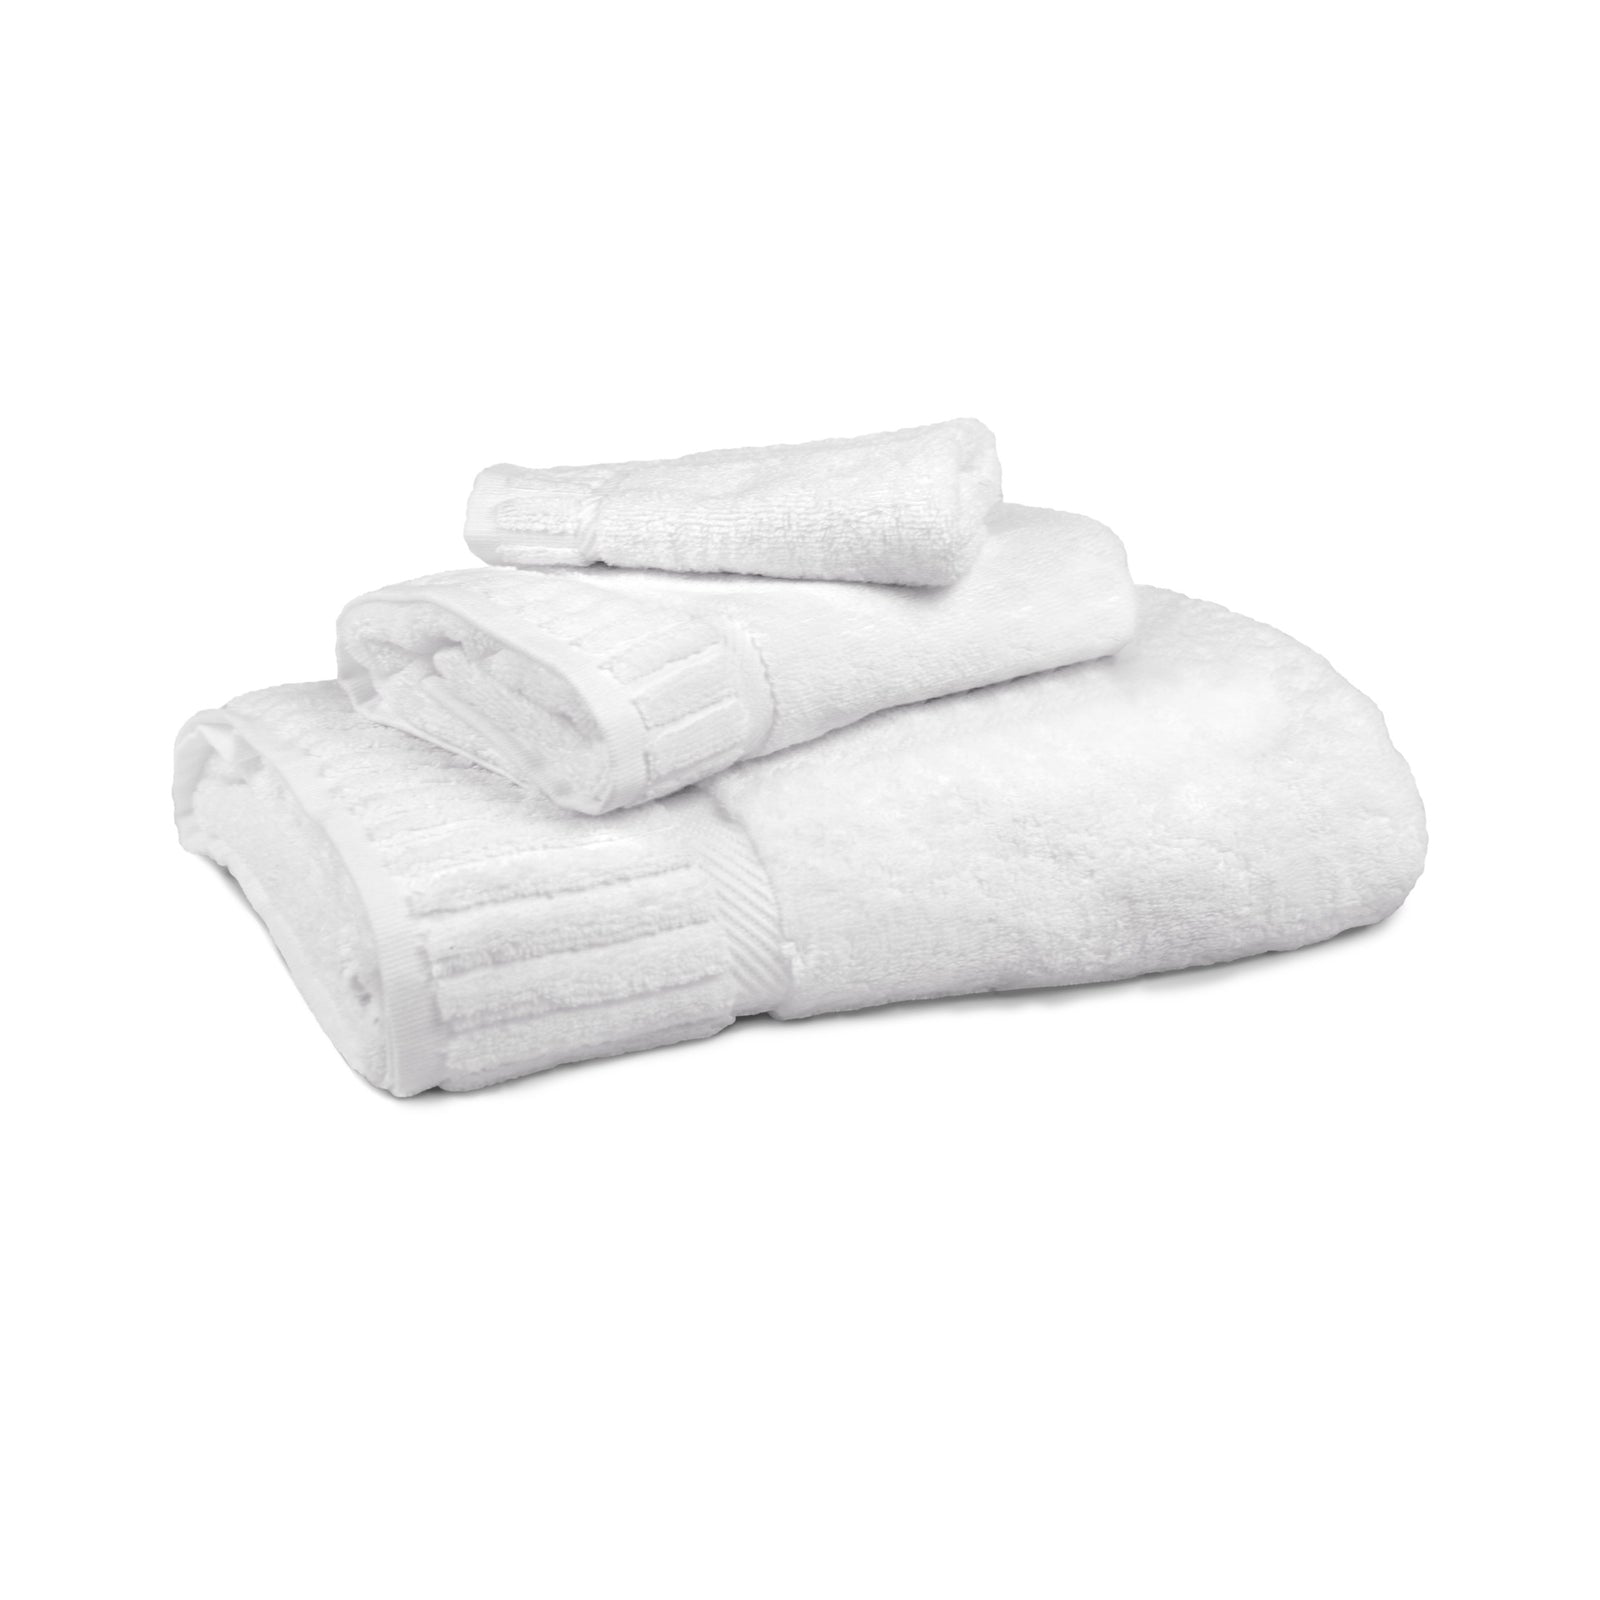 White 100% Cotton Towels in Bulk